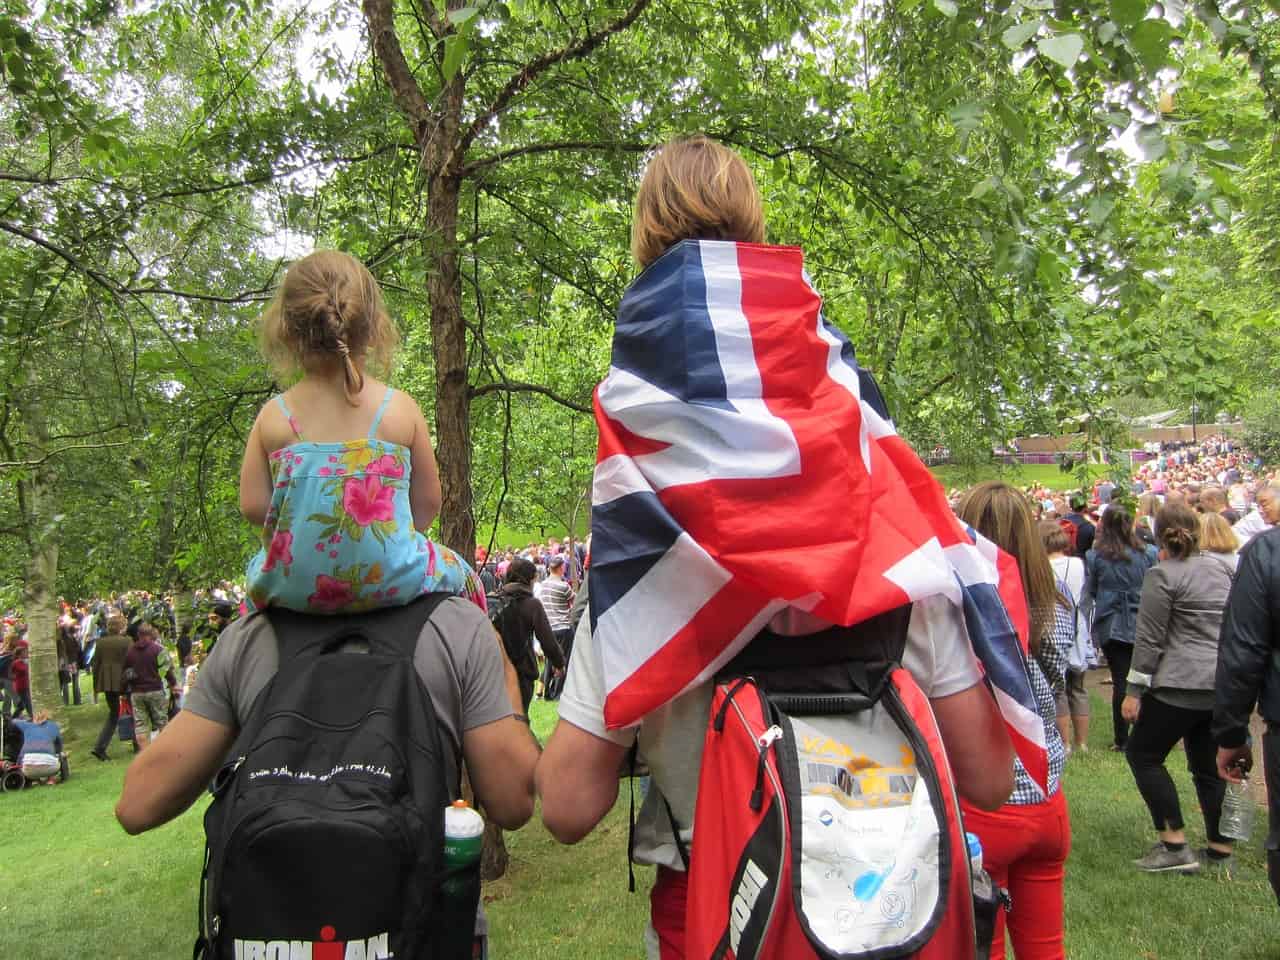 two little kids on their parent's shoulders in a park; one child with the Union Jack flag around him